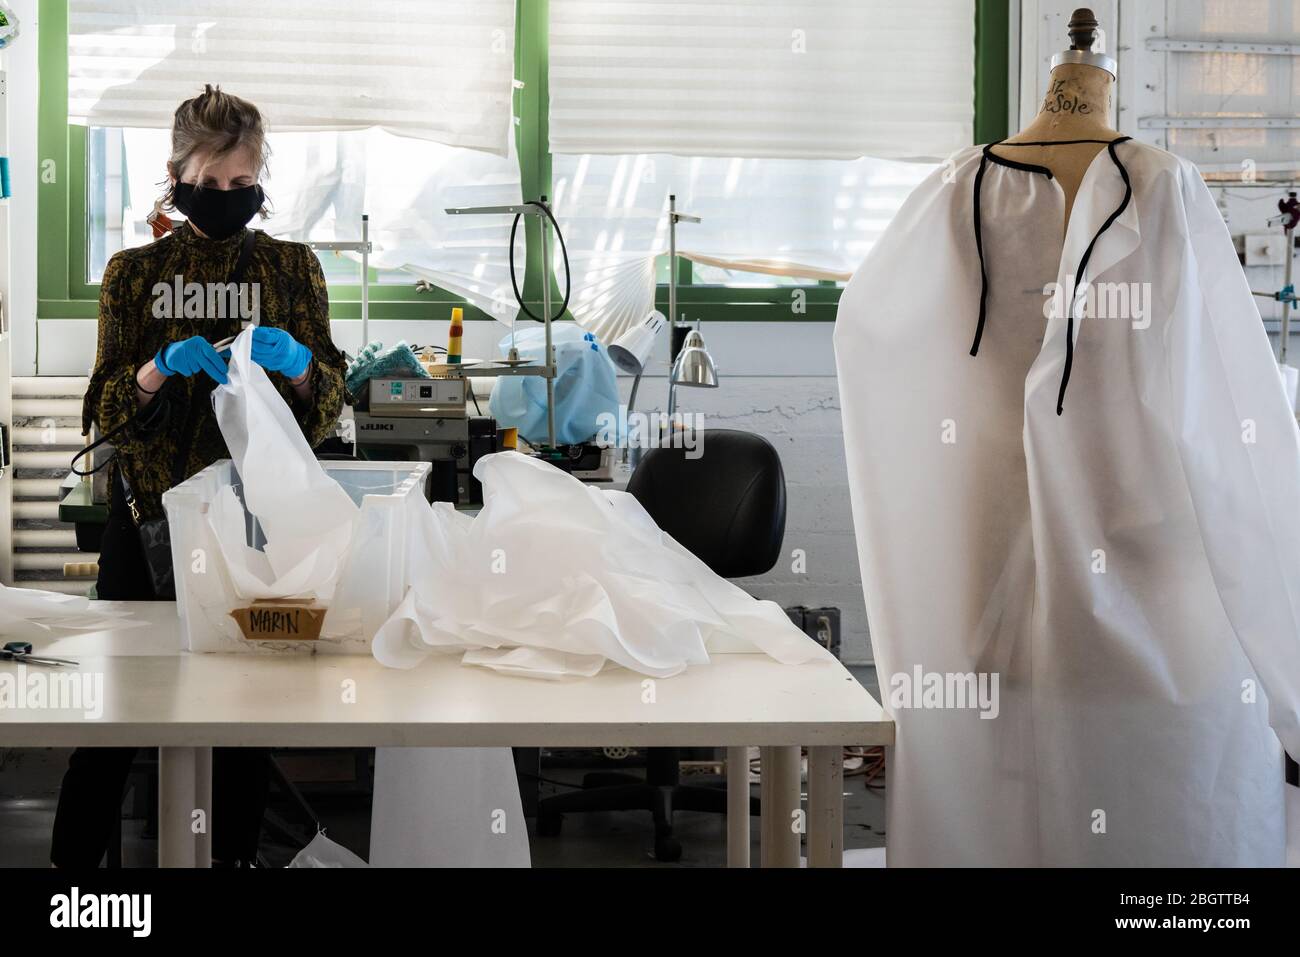 Brooklyn, United States Of America . 22nd Apr, 2020. A seamstress prepares the fabric for reusable hospital gowns for frontline healthcare workers at Malia Mills, a fashion garment factory in Industry City in Brooklyn, New York, on April 22, 2020. (Photo by Gabriele Holtermann-Gorden/Sipa USA) Credit: Sipa USA/Alamy Live News Stock Photo